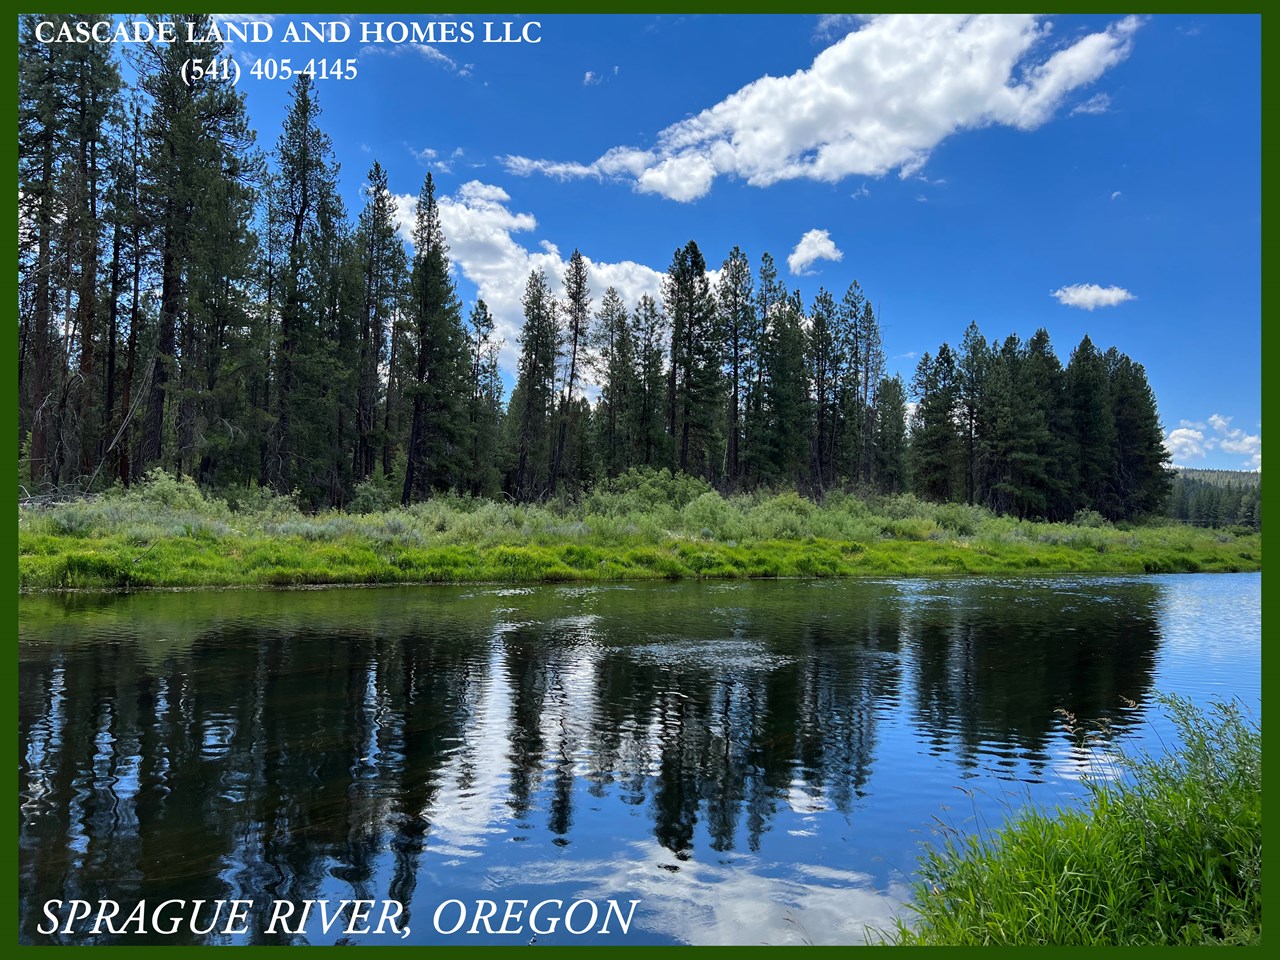 this photo of the sprague river was taken just outside of chiloquin where it converges with the williamson river and flows on to provide upper klamath lake with its primary source of fresh water. both rivers are famous for spectacular fishing and fly fishing with many trophy sized trout being caught in the rivers. bring your fishing gear! this property is a short walk to the river!